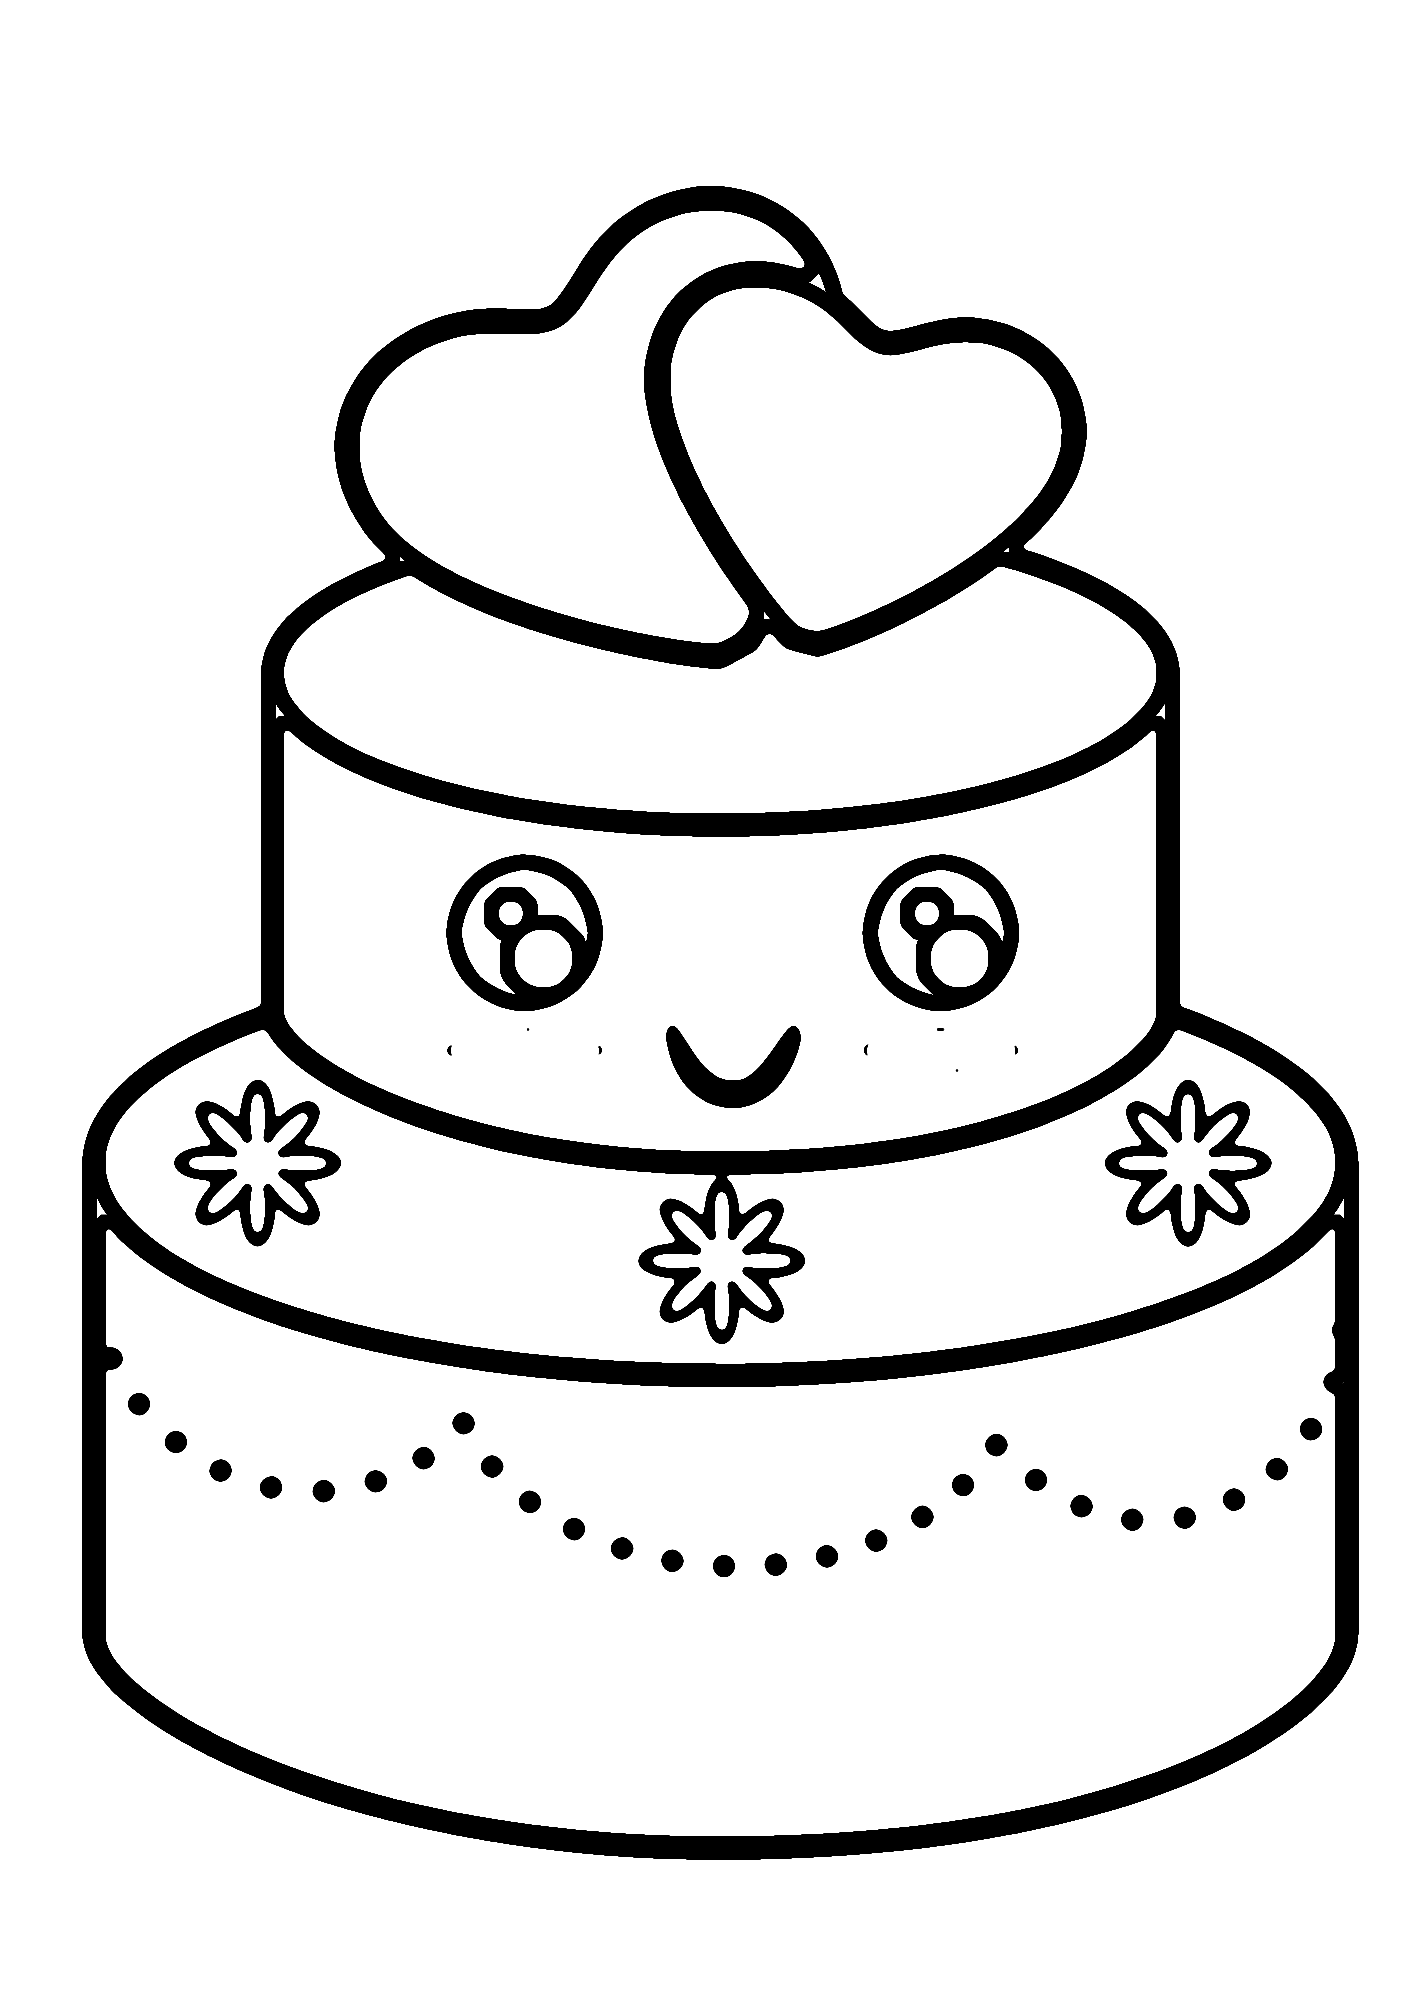 Wedding Cake For Children Coloring Page